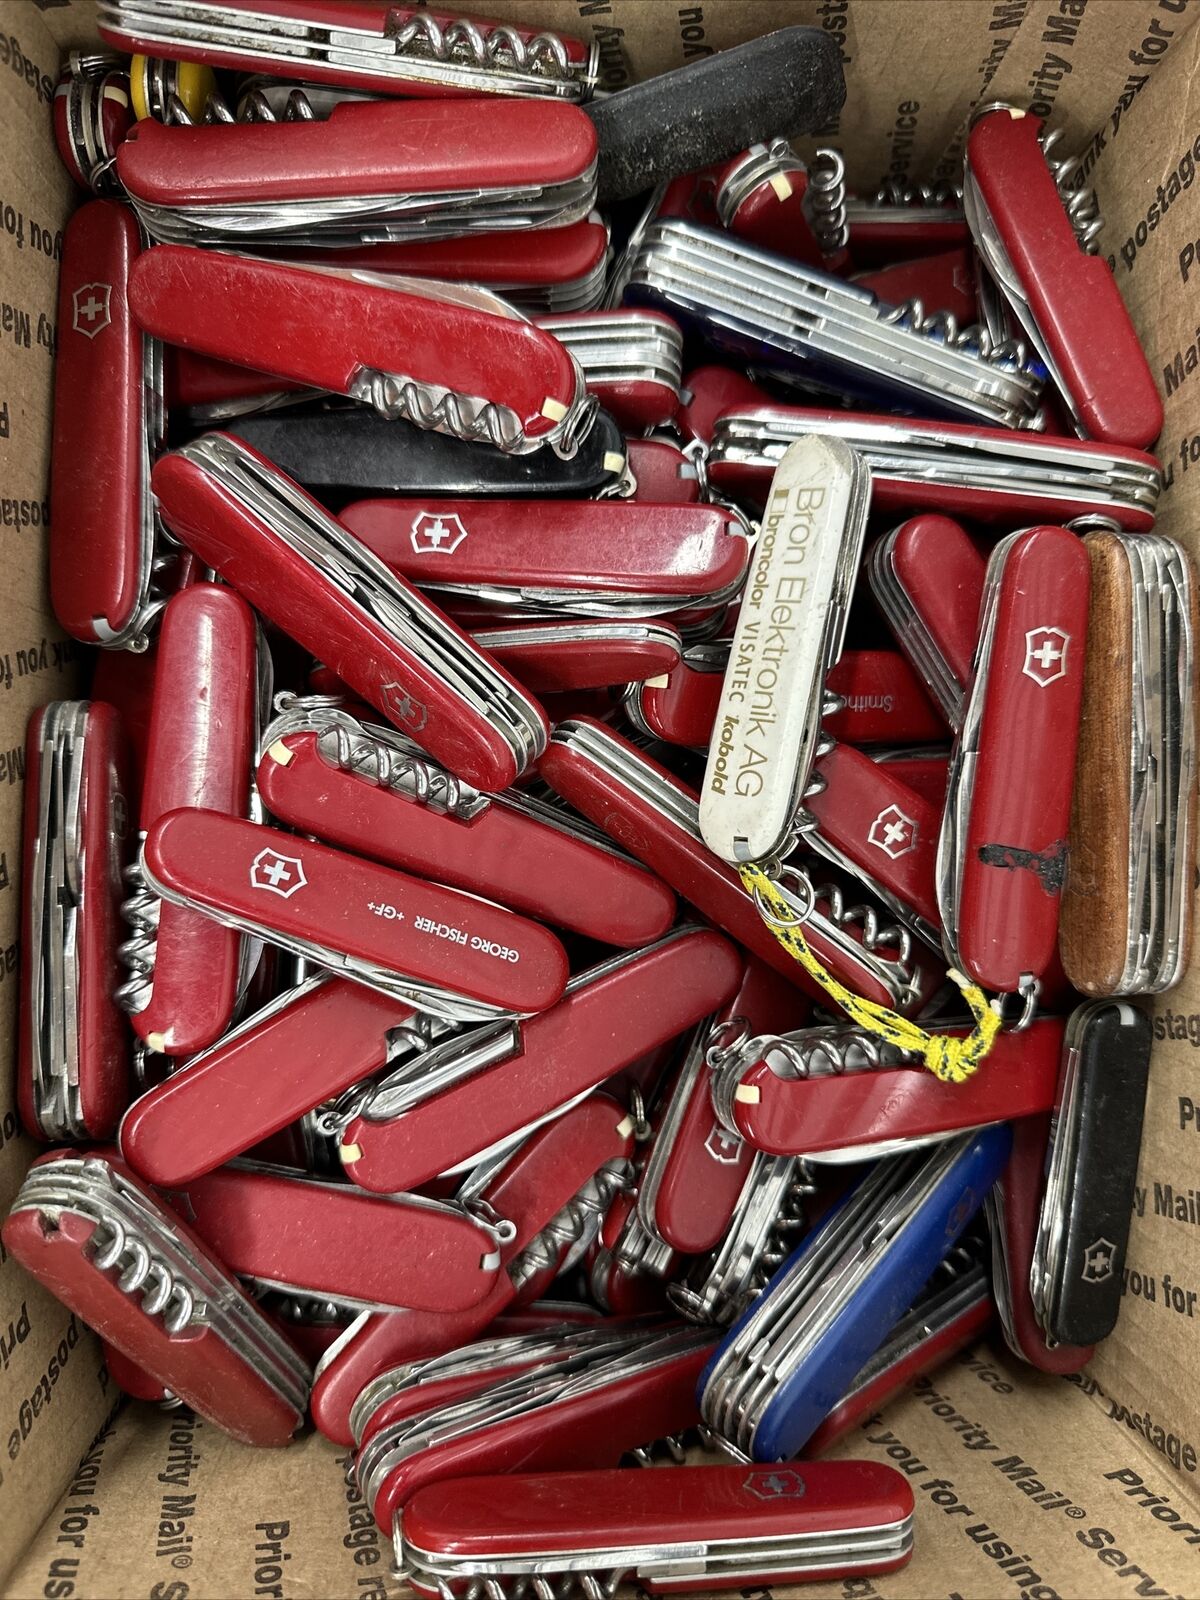 Swiss Army Knife Lot of 7 Knives Victorinox Assorted Sizes Models RED ONLY